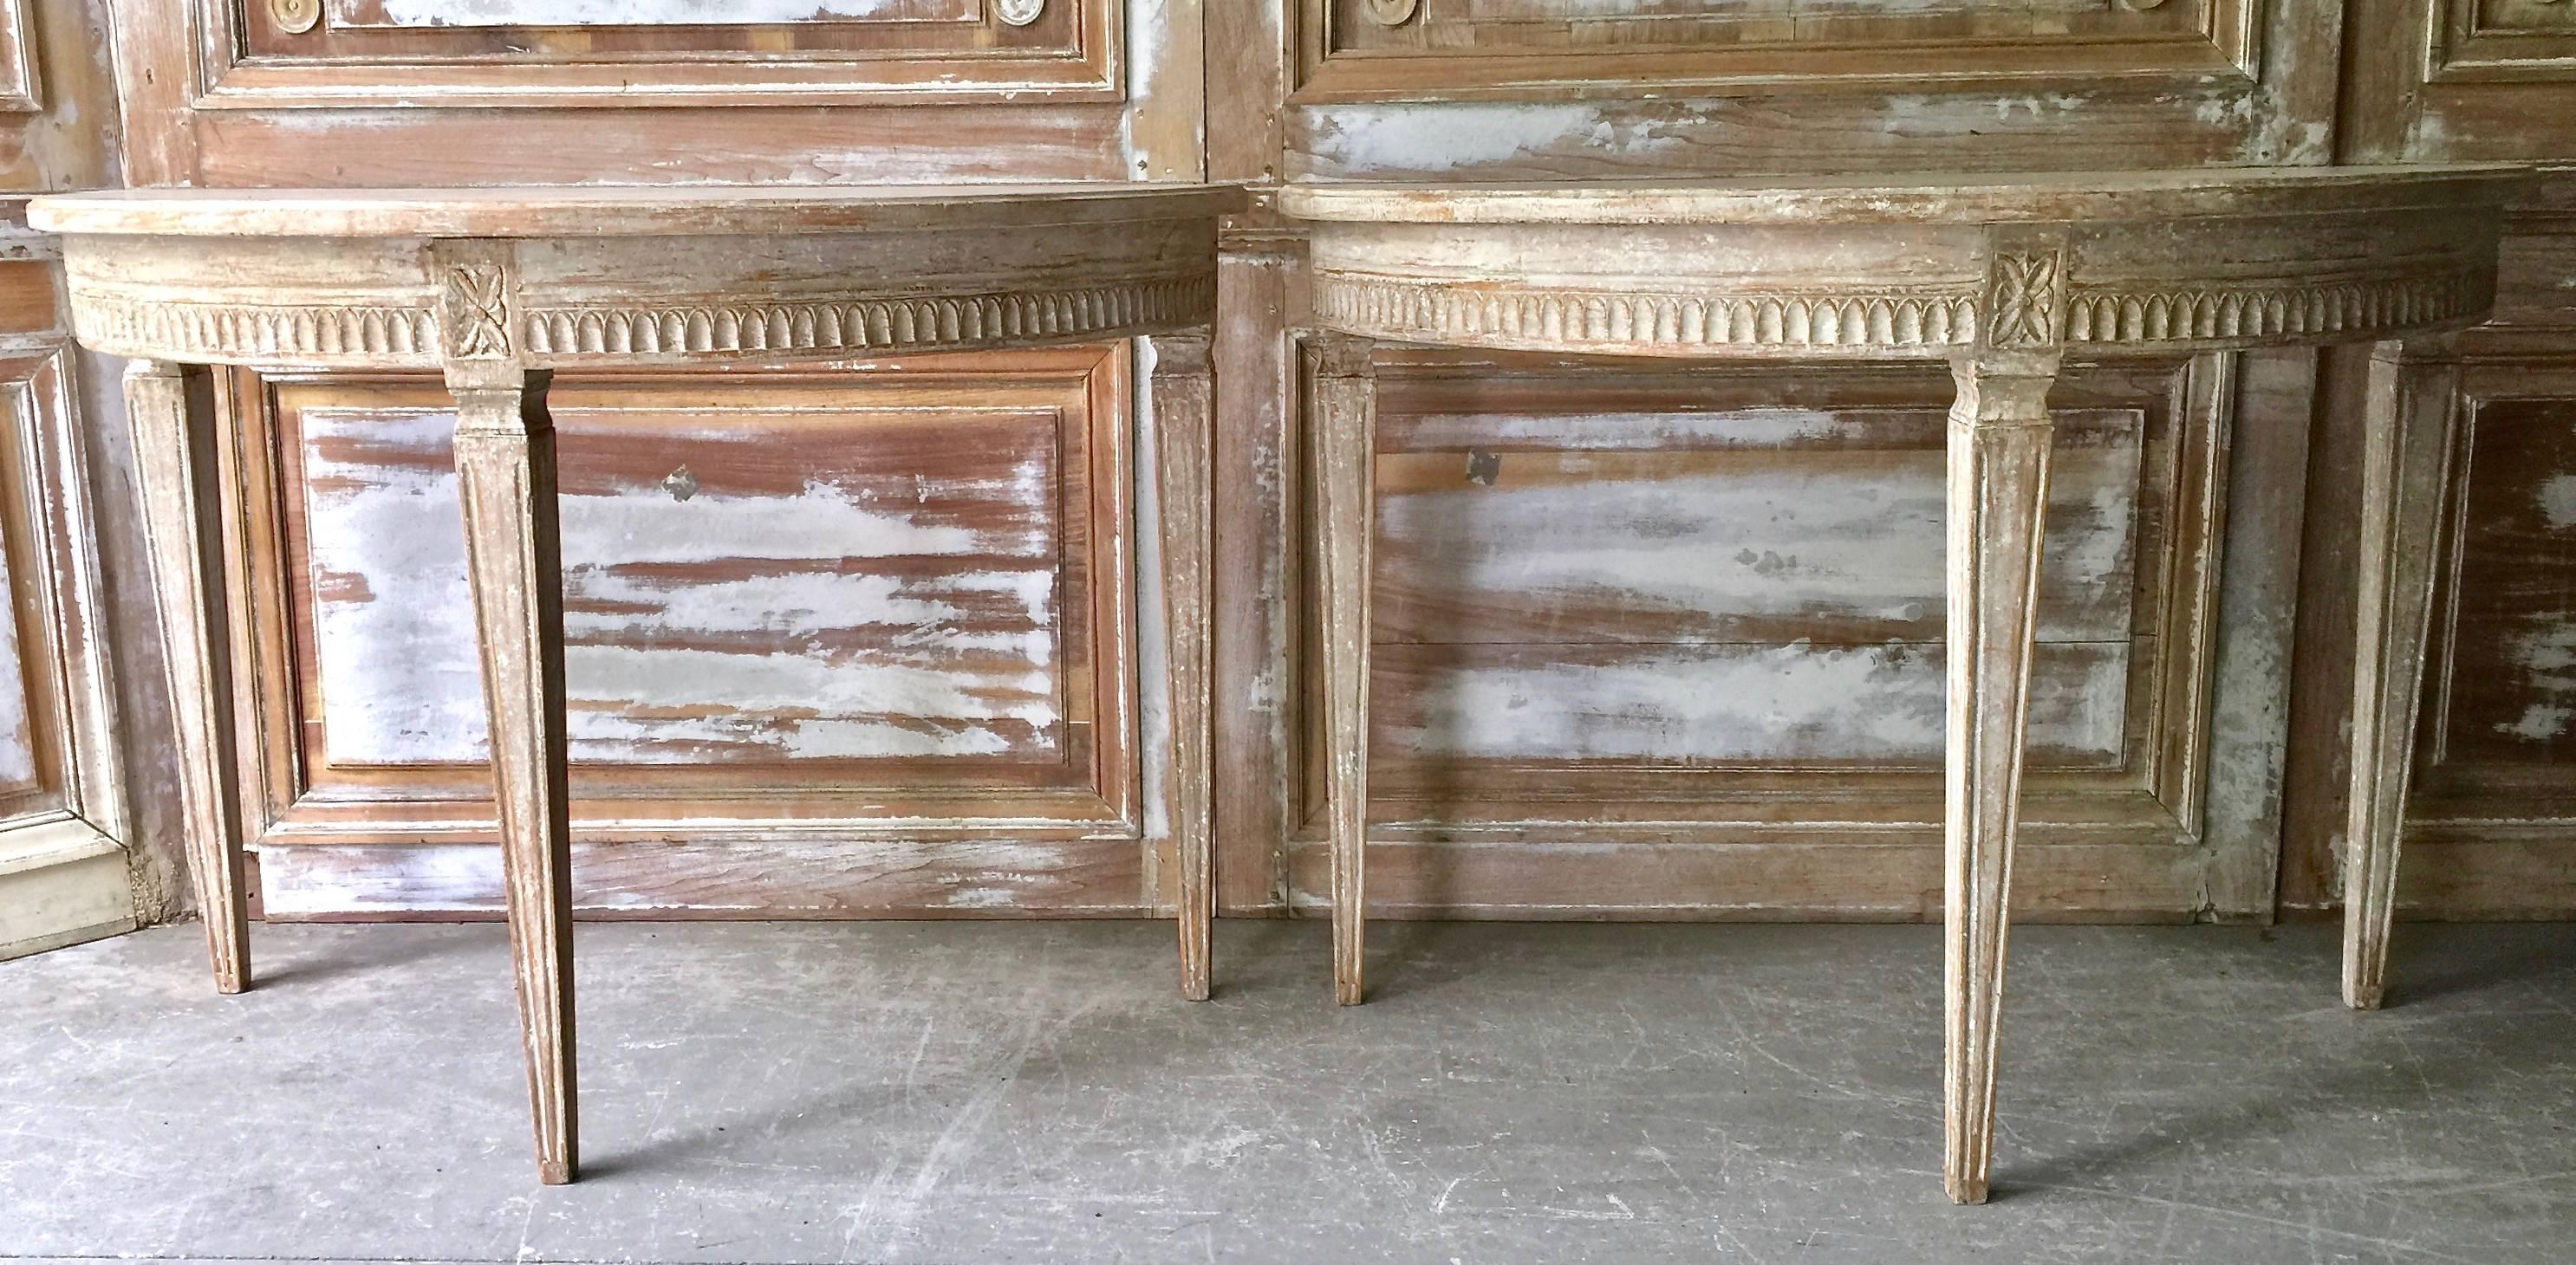 Pair of Swedish Gustavian period demilune console tables beautifully carved apron with Lamb's tongue molding and florets on the corner blocks. Elegant tapered and fluted legs. 
Stockholm, Sweden, circa 1810. 
Here are few examples … surprising